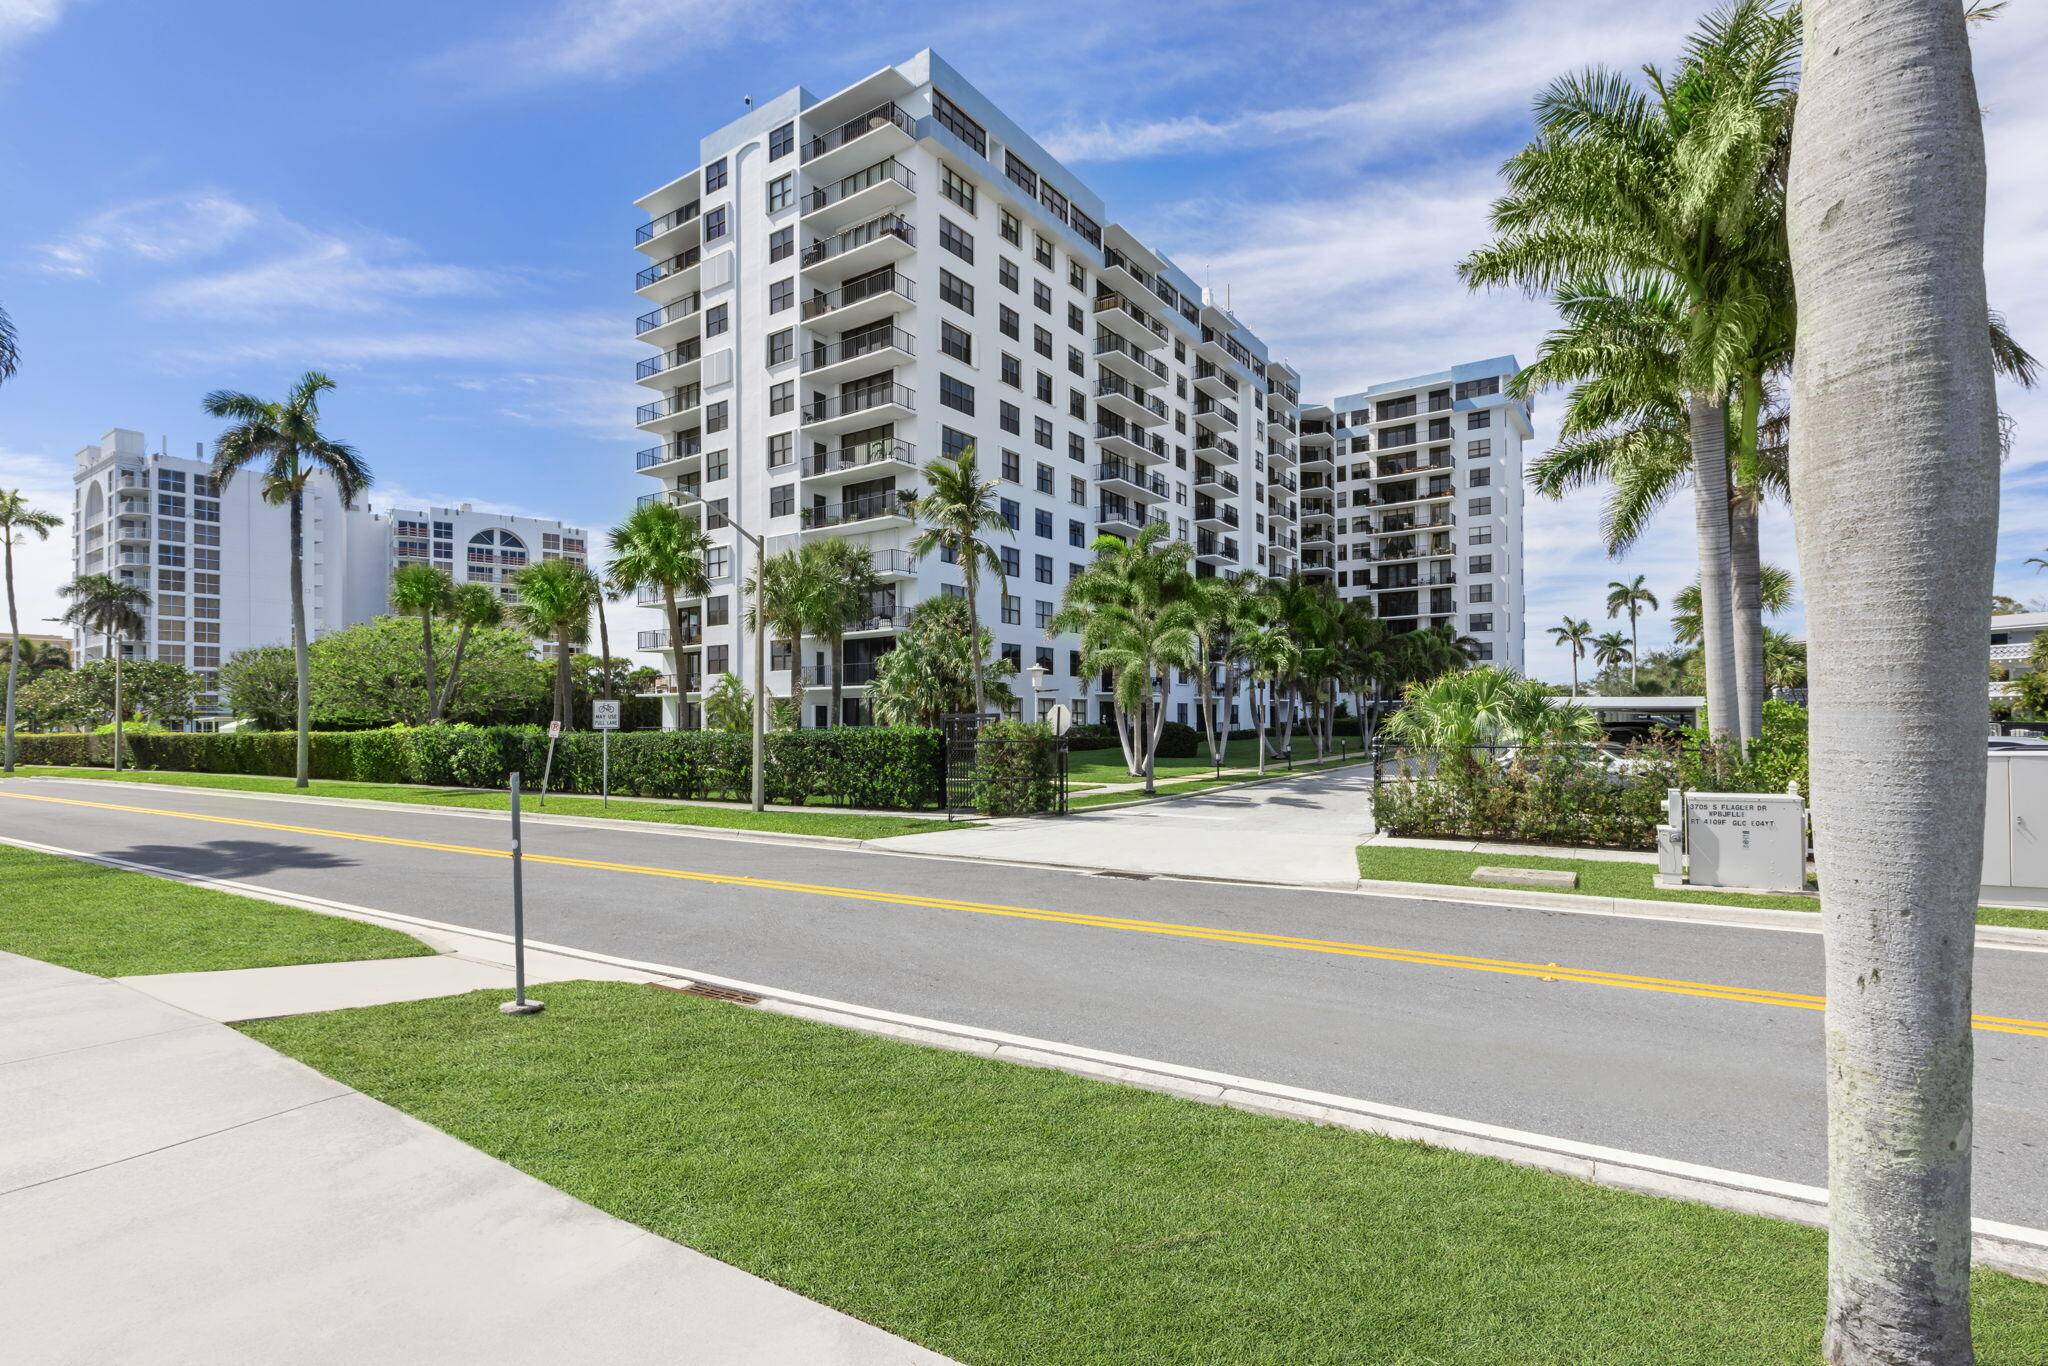 Bright and spacious one bedroom, one and a half bathroom home in the full service Portofino South Condominium located directly on the Intracoastal waterfront.